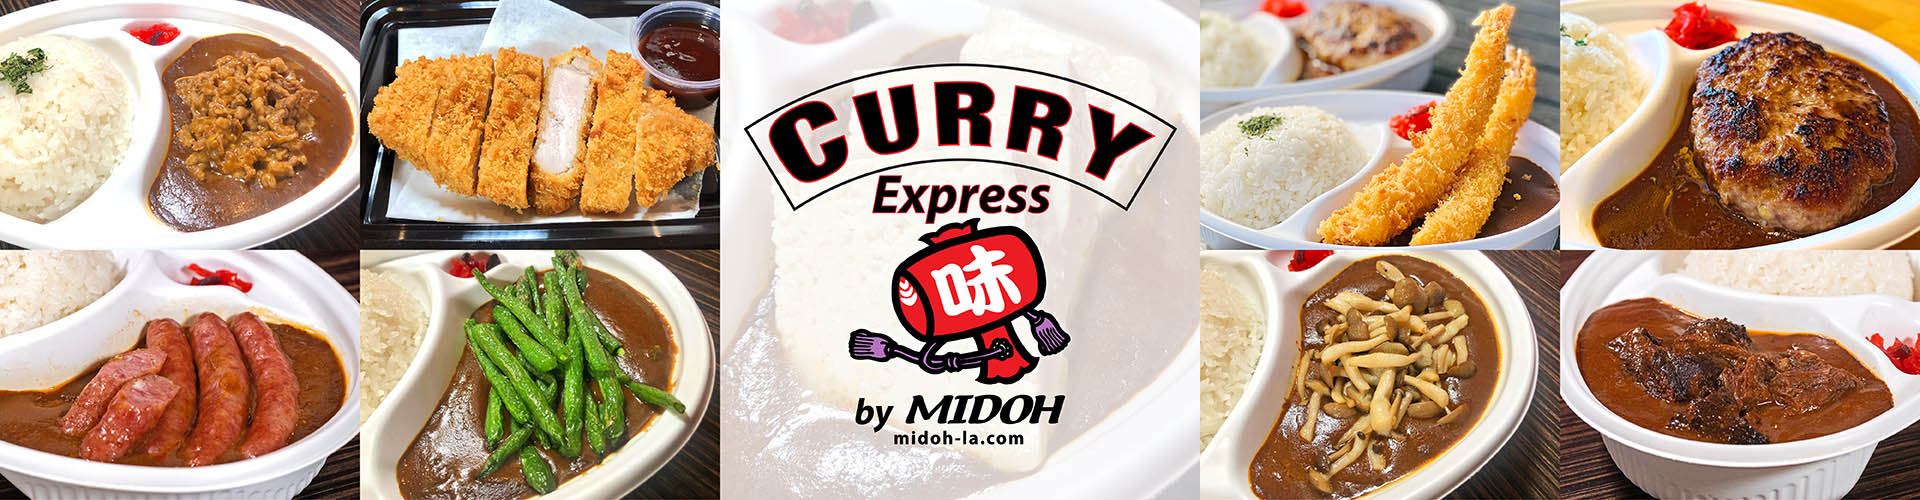 CURRY Express by MIDOH -  詳細は公式サイトwww.midoh-la.comへ